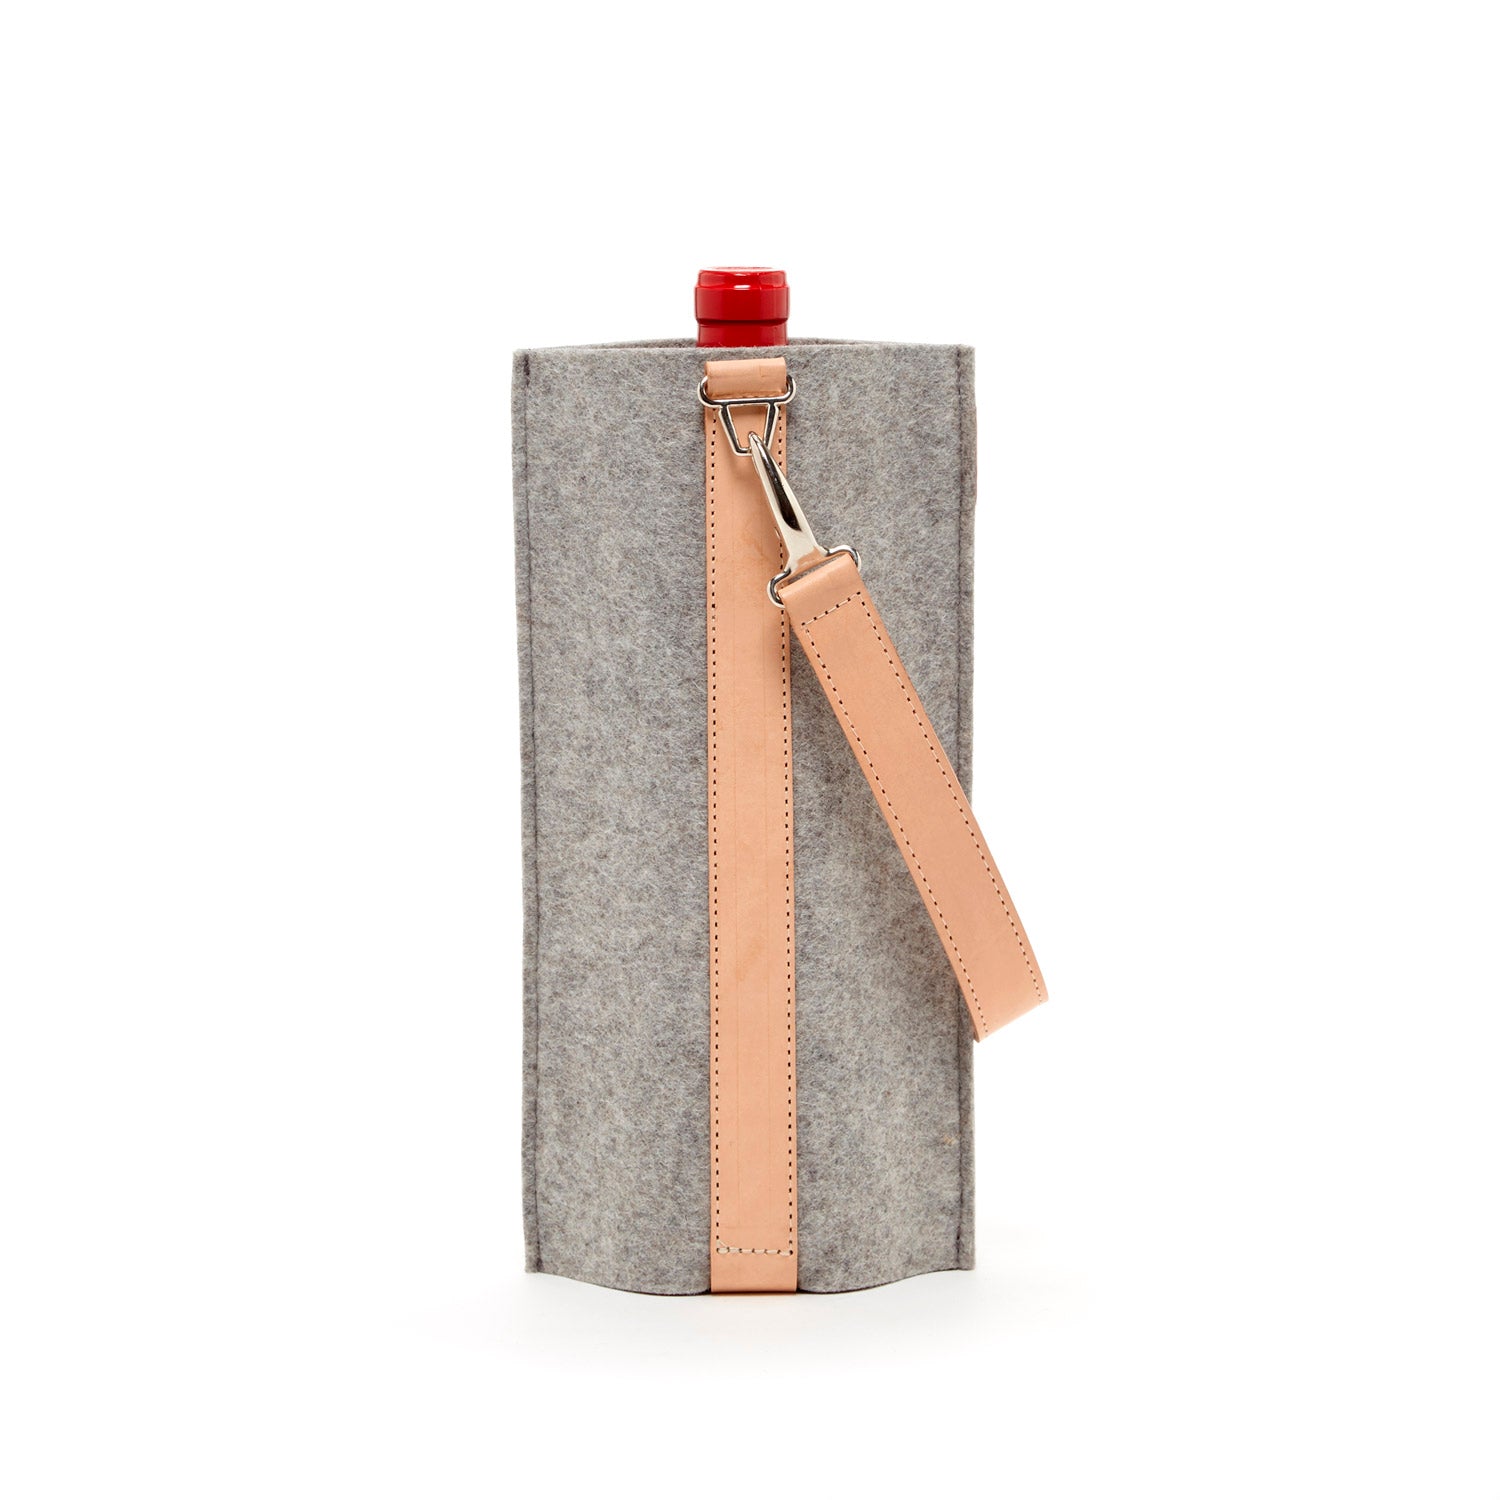 Solo Wine Carrier Gray Felt / Natural Leather